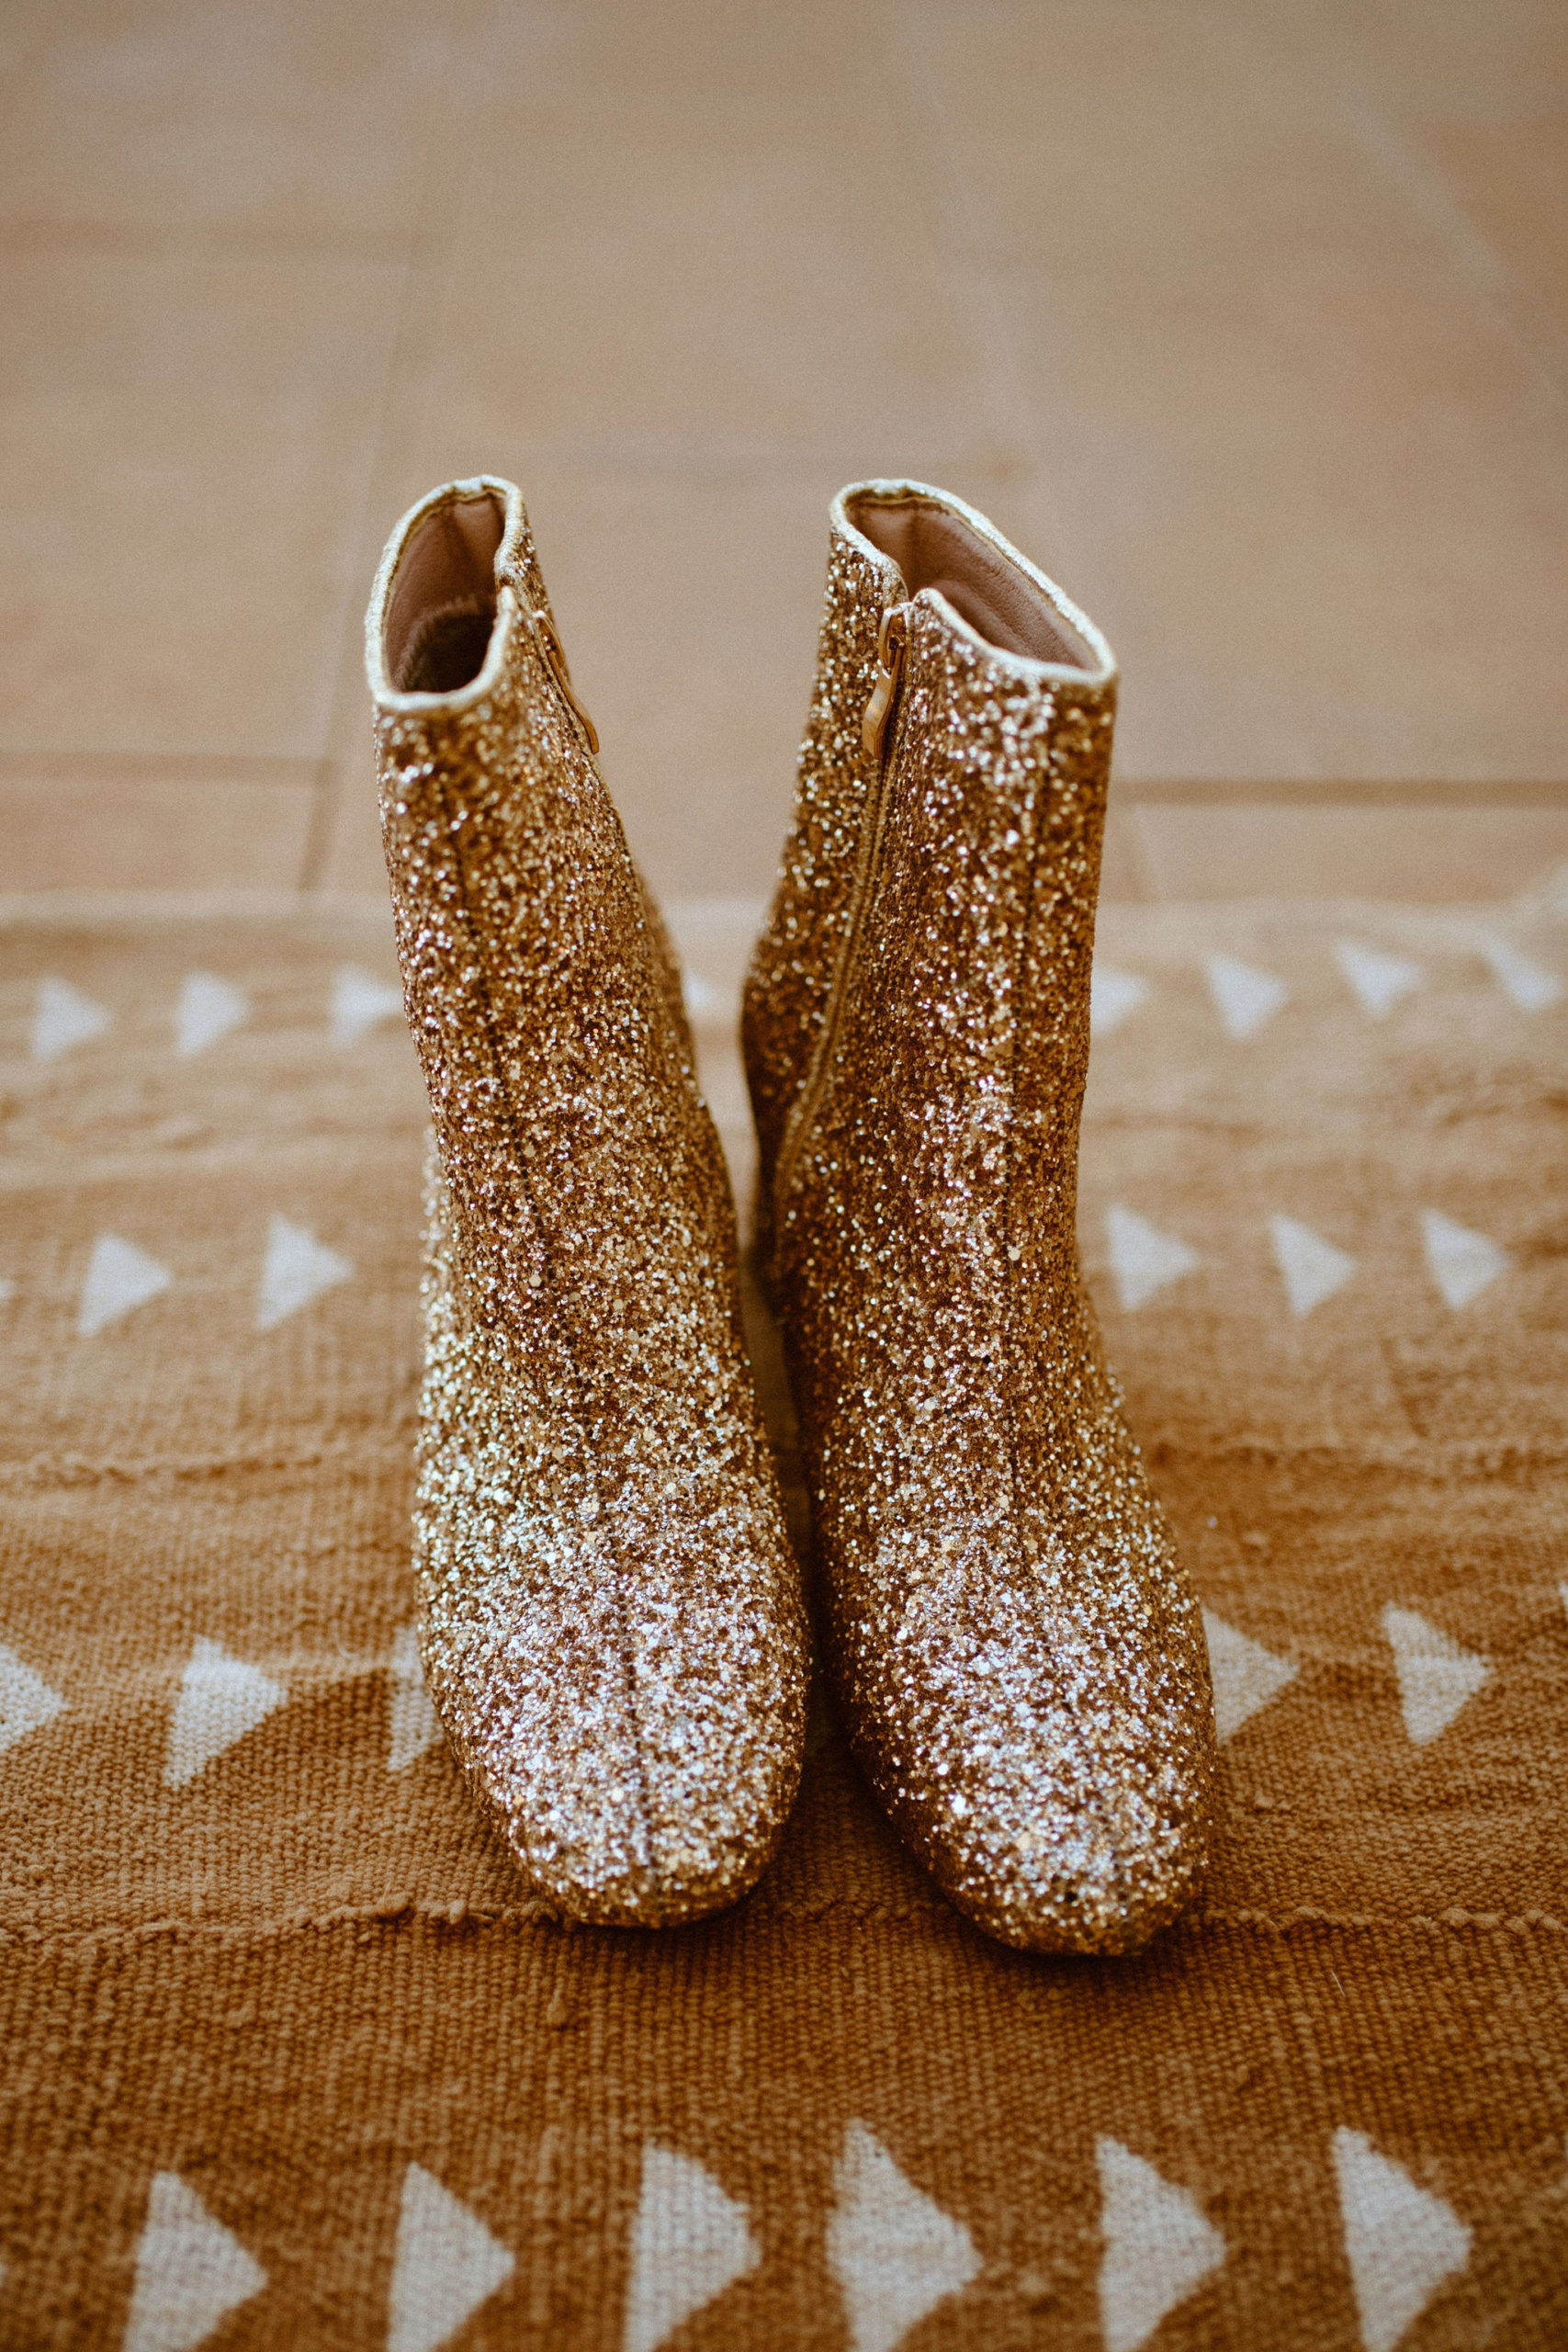 The brides gold sparkly cowboy boots